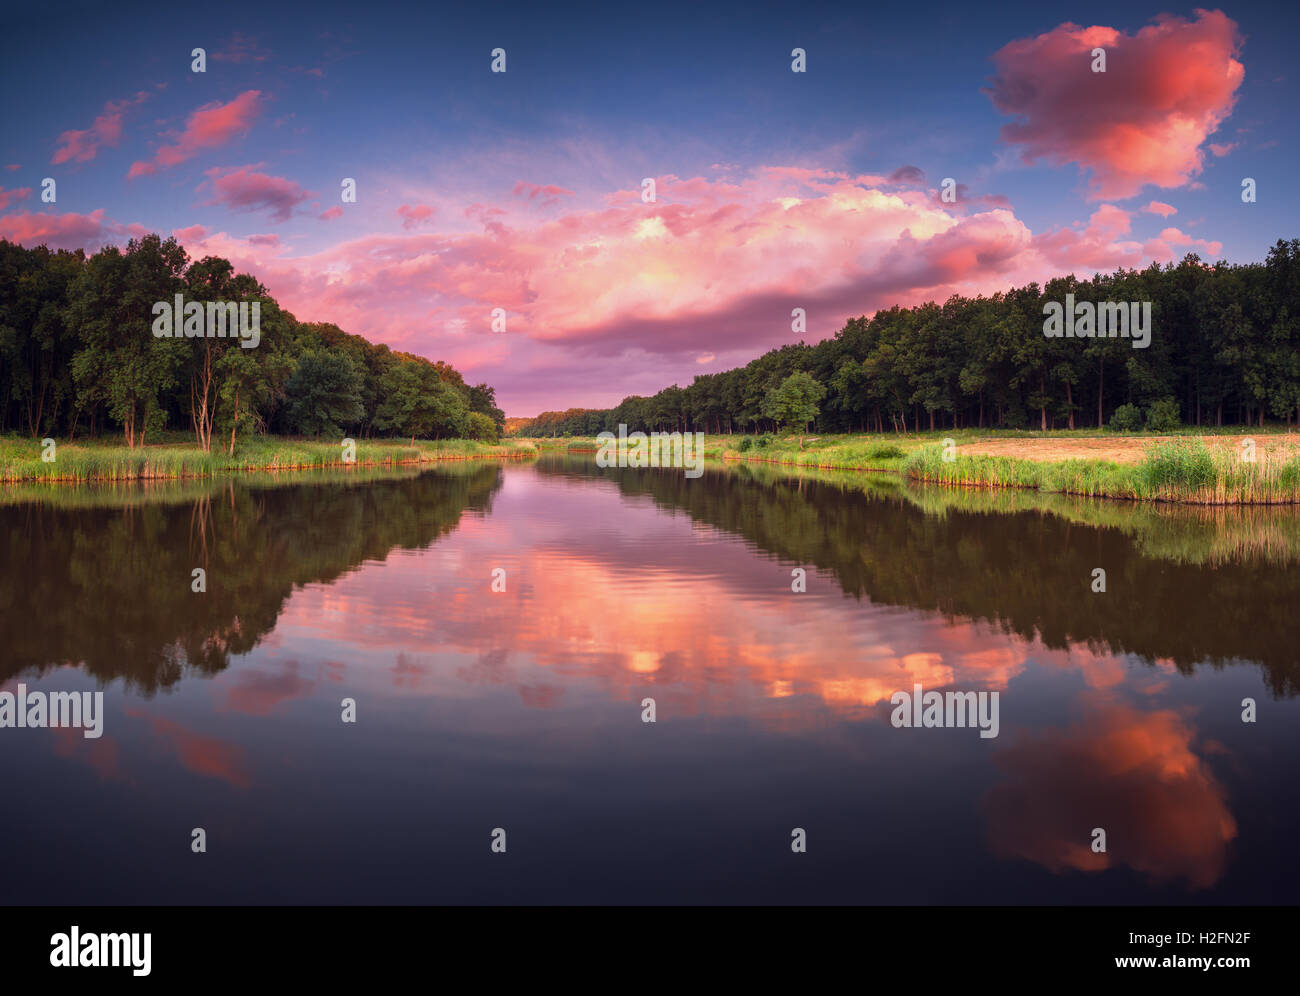 Beautiful panoramic landscape with colorful cloudy sky, sun, lake and trees in the evening. Summer sunset at the river Stock Photo